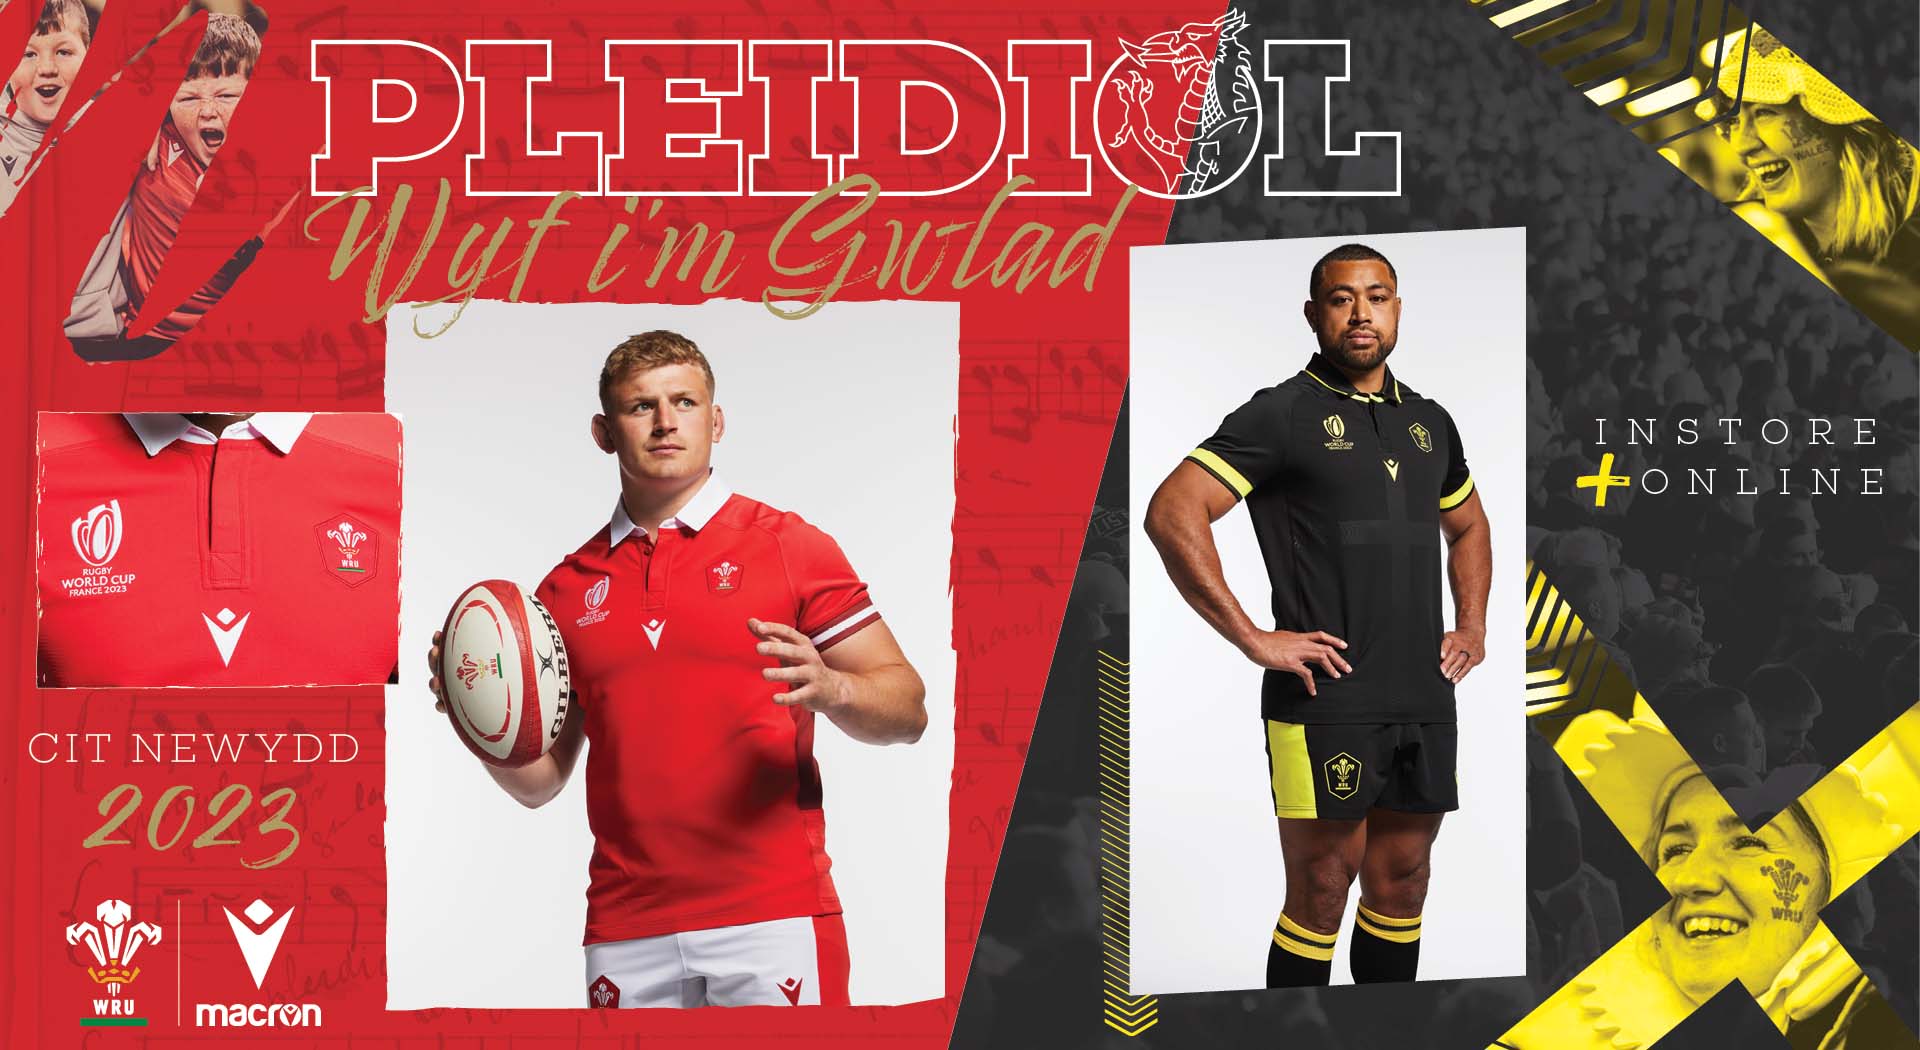 Words from the national anthem and the flag of Saint David on the Wales mens team jerseys for RWC23 Worldwide Shipping